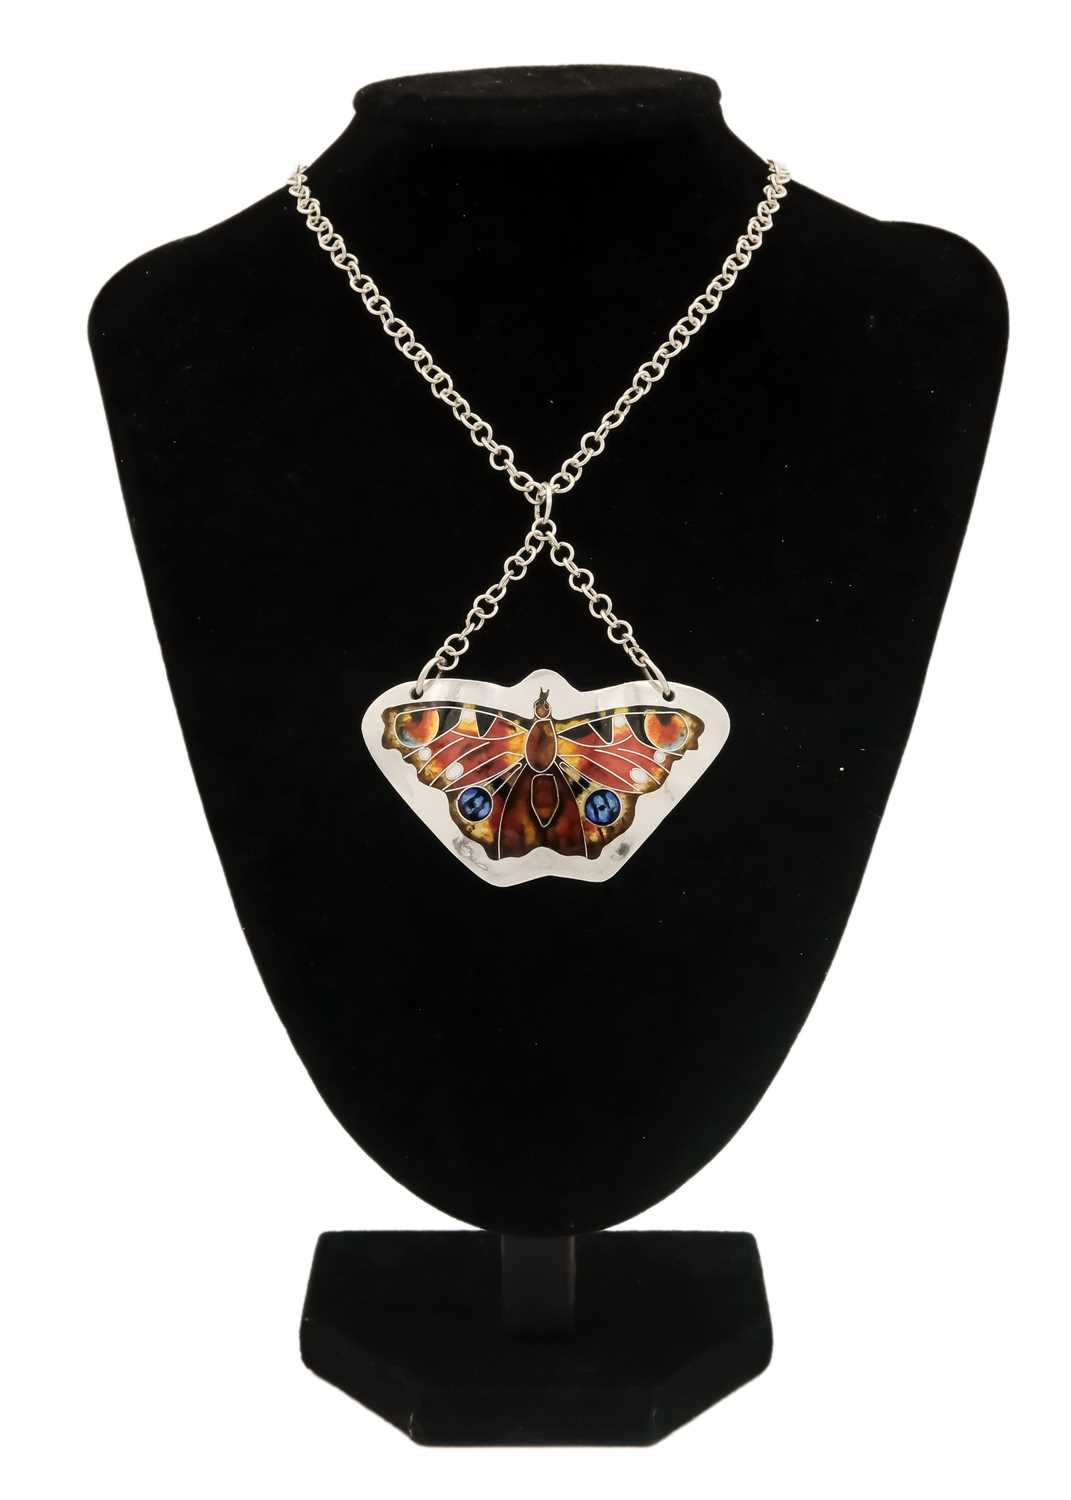 A .999 fine silver and enamel 'Peacock Butterfly' pendant necklace by Samantha Suddaby. - Image 3 of 5